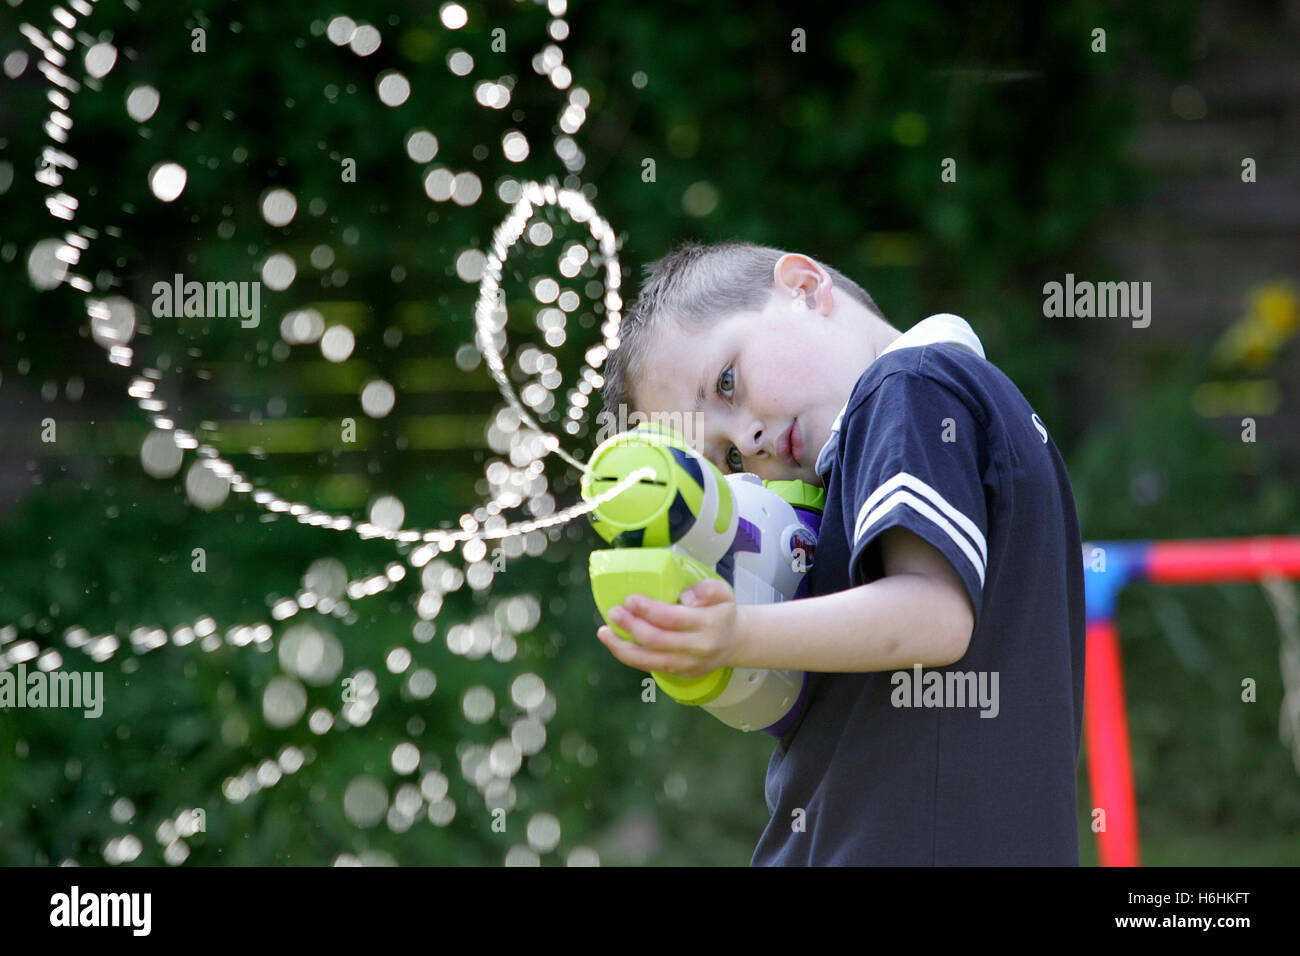 Young boy playing with water pistol. Water is backlit Stock Photo